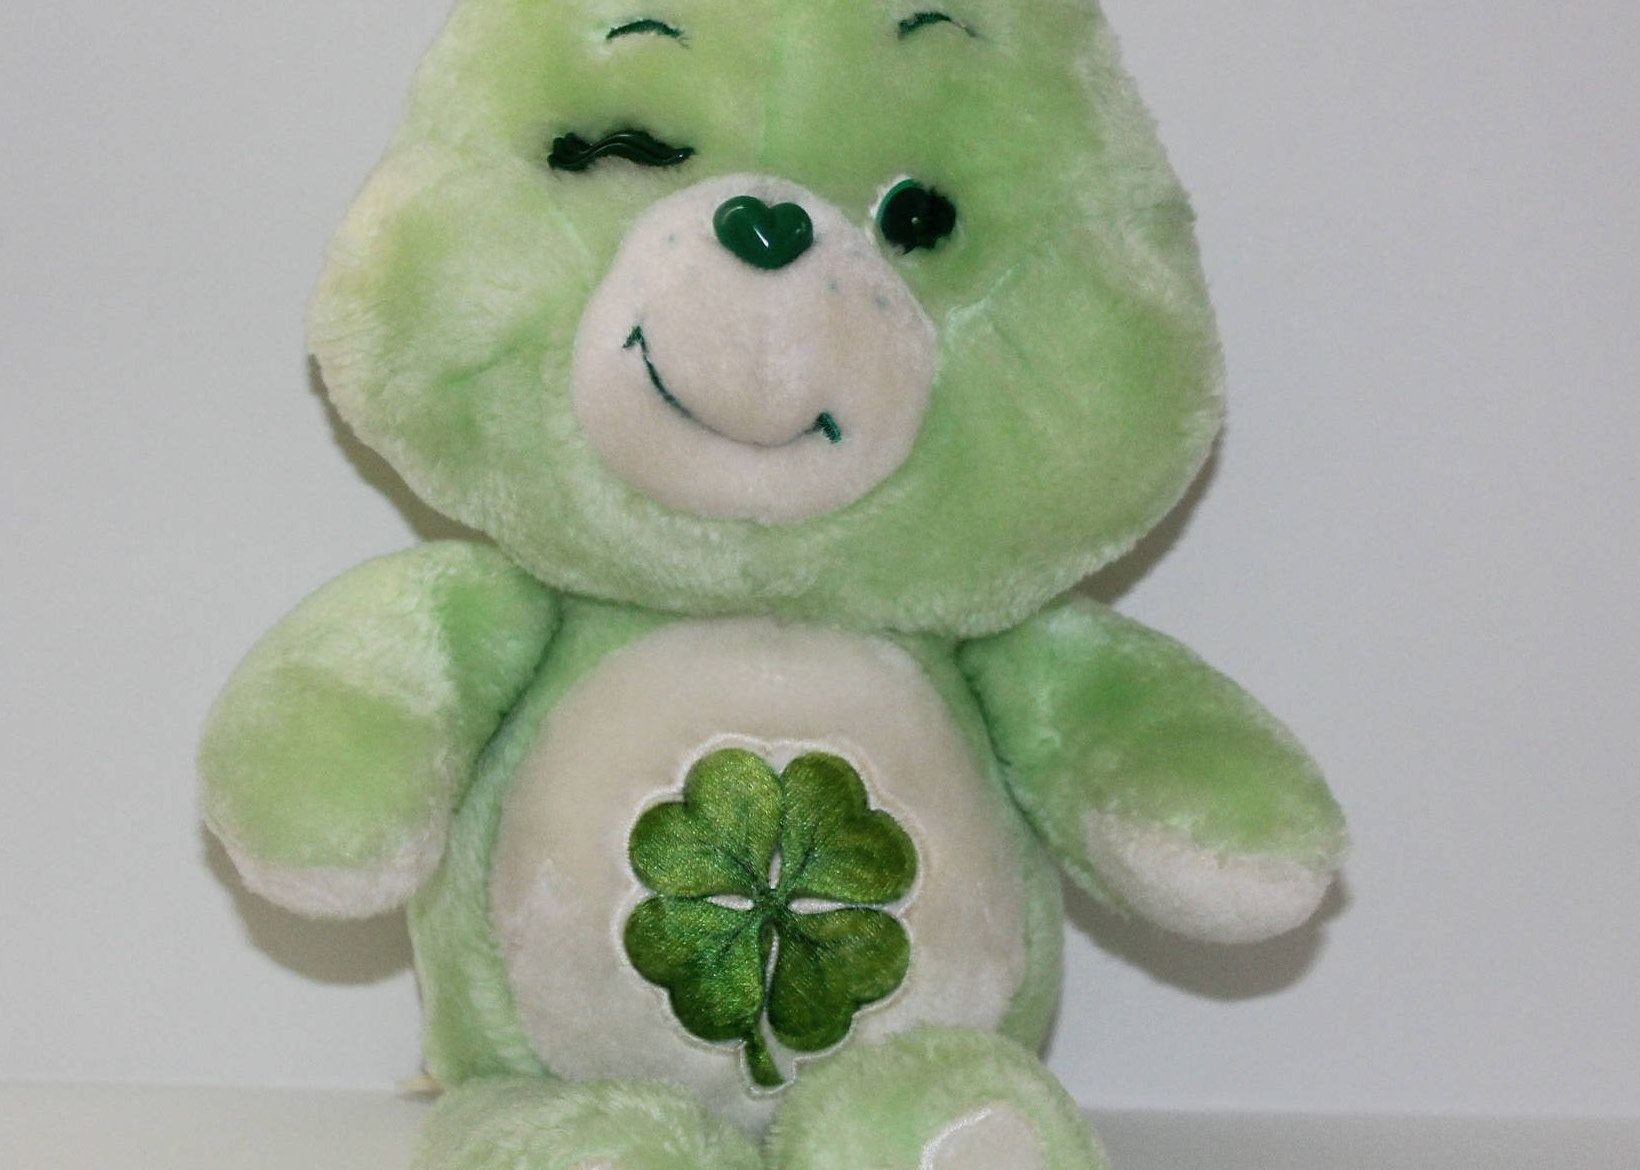 The green Good Luck Care Bear, with shamrock